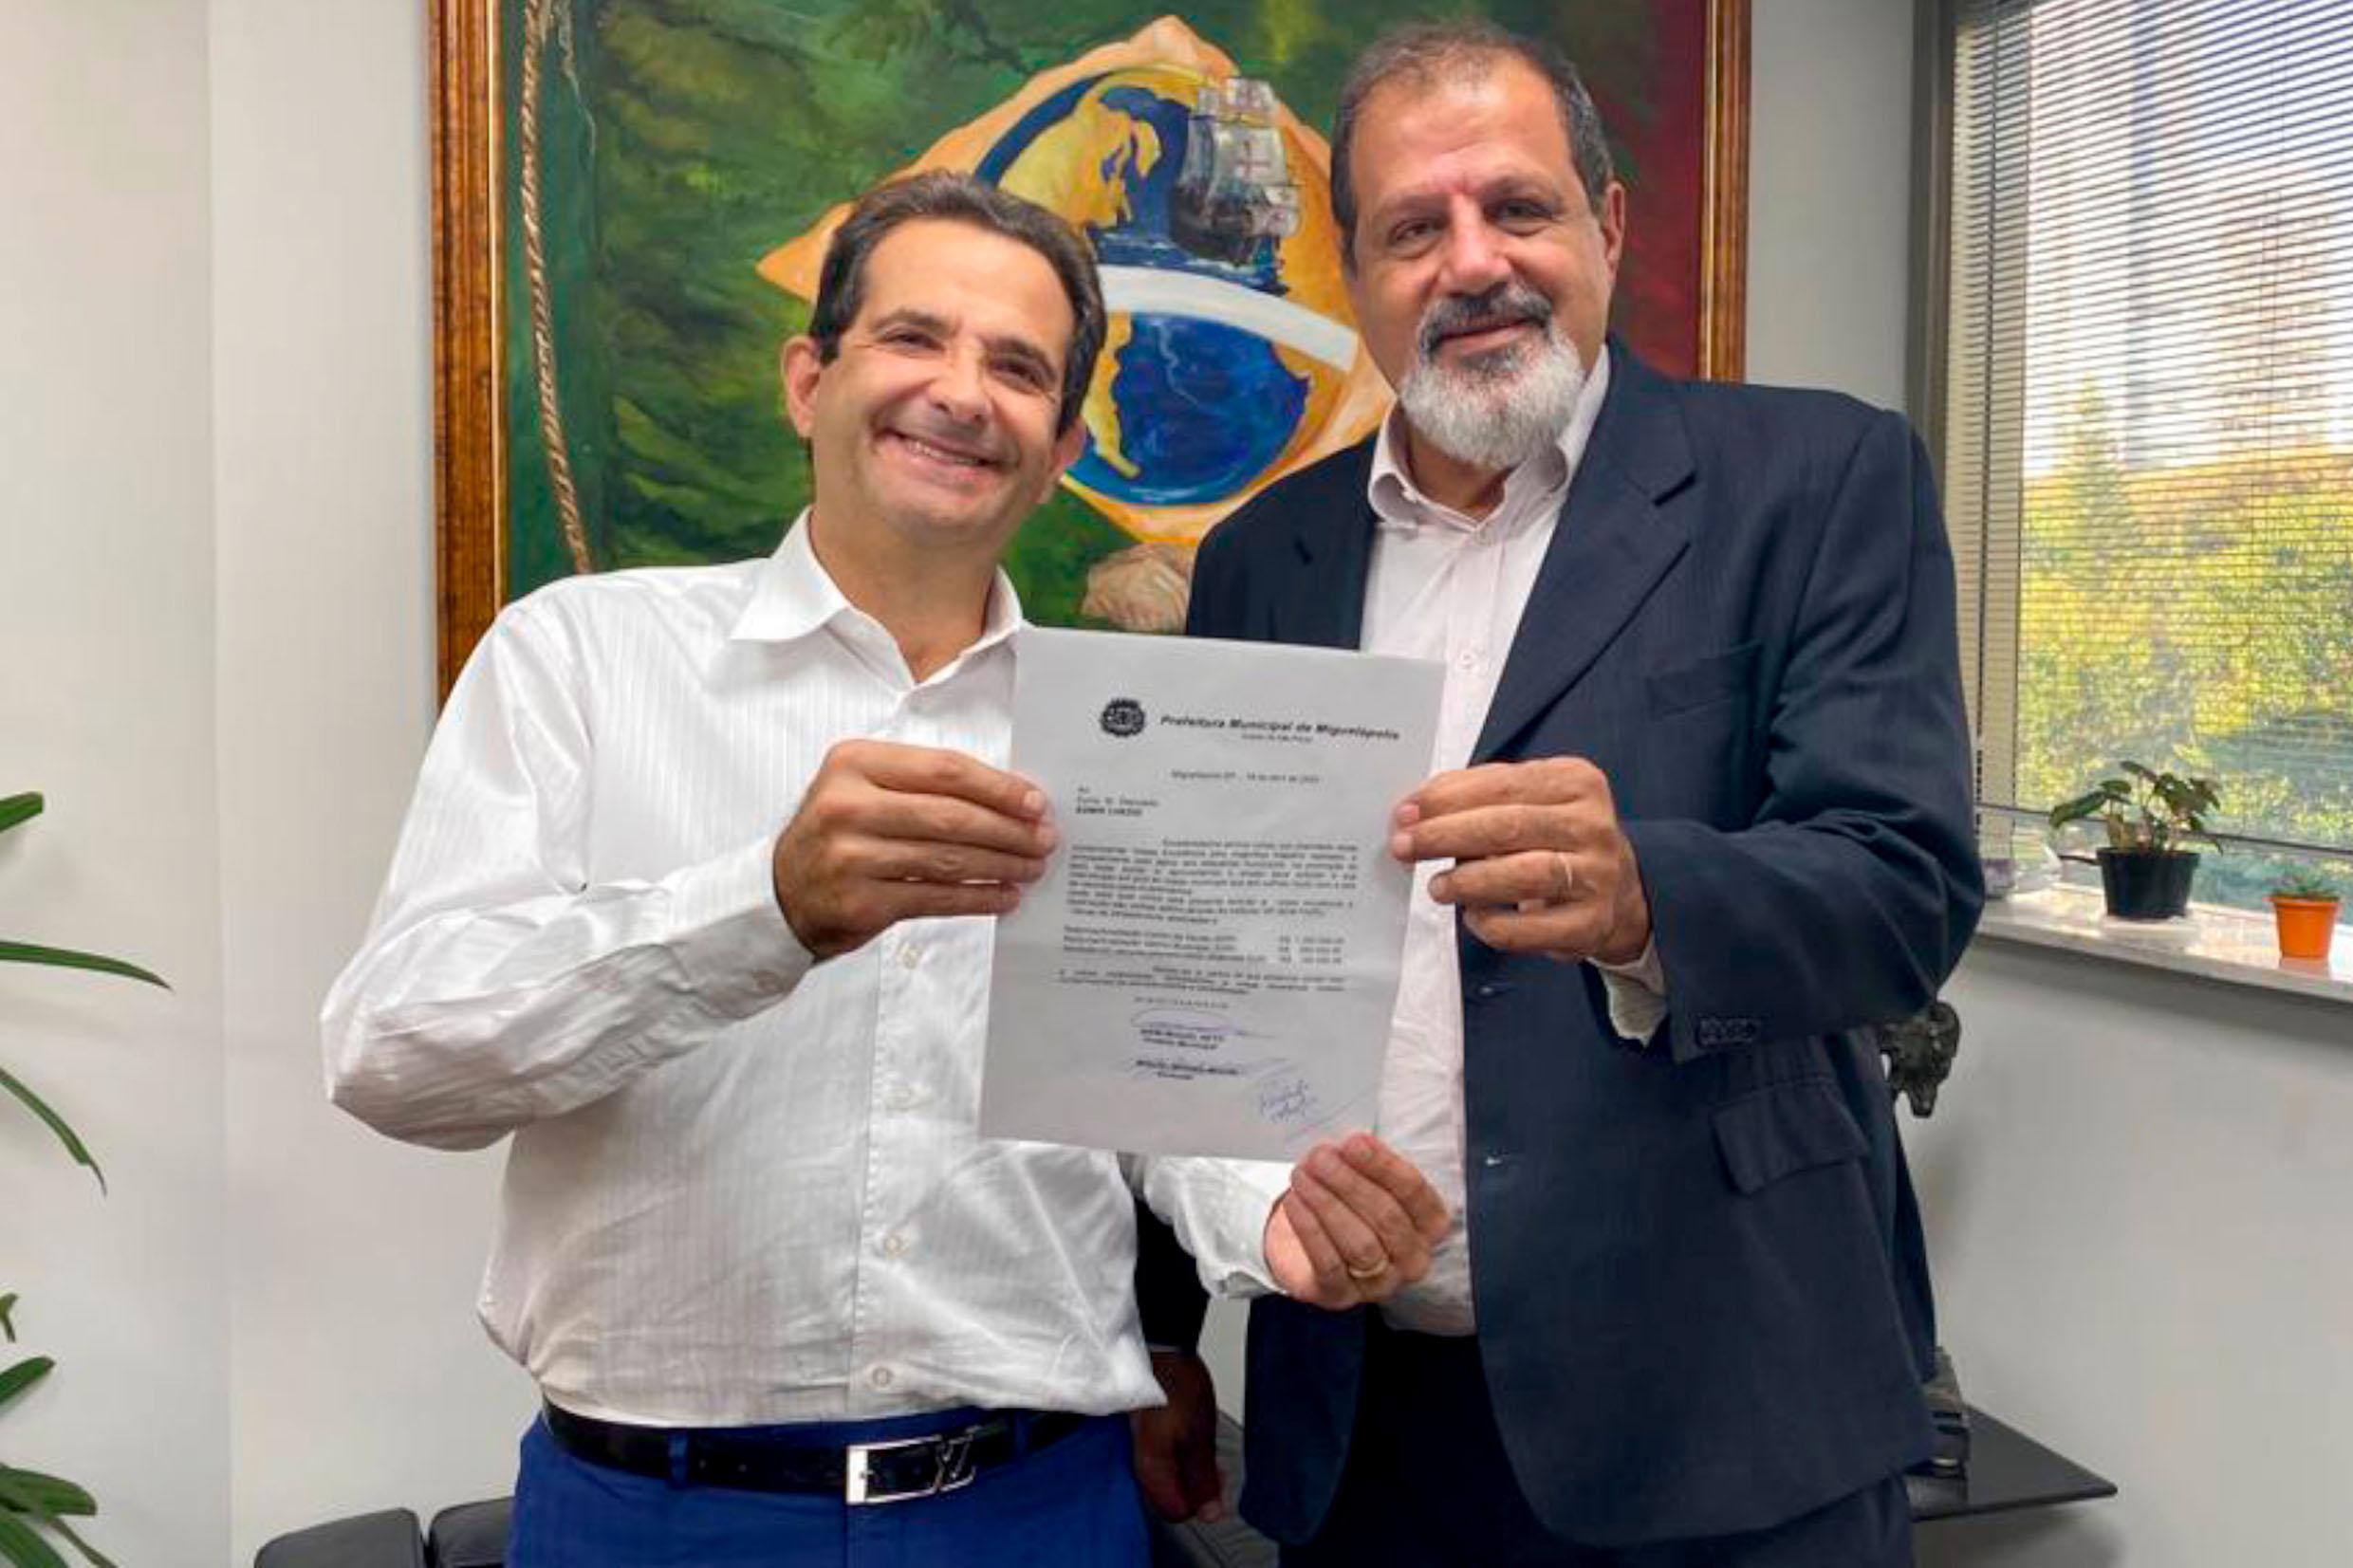 Edmir Chedid e Miguel Moisés <a style='float:right' href='https://www3.al.sp.gov.br/repositorio/noticia/N-06-2022/fg288879.jpg' target=_blank><img src='/_img/material-file-download-white.png' width='14px' alt='Clique para baixar a imagem'></a>